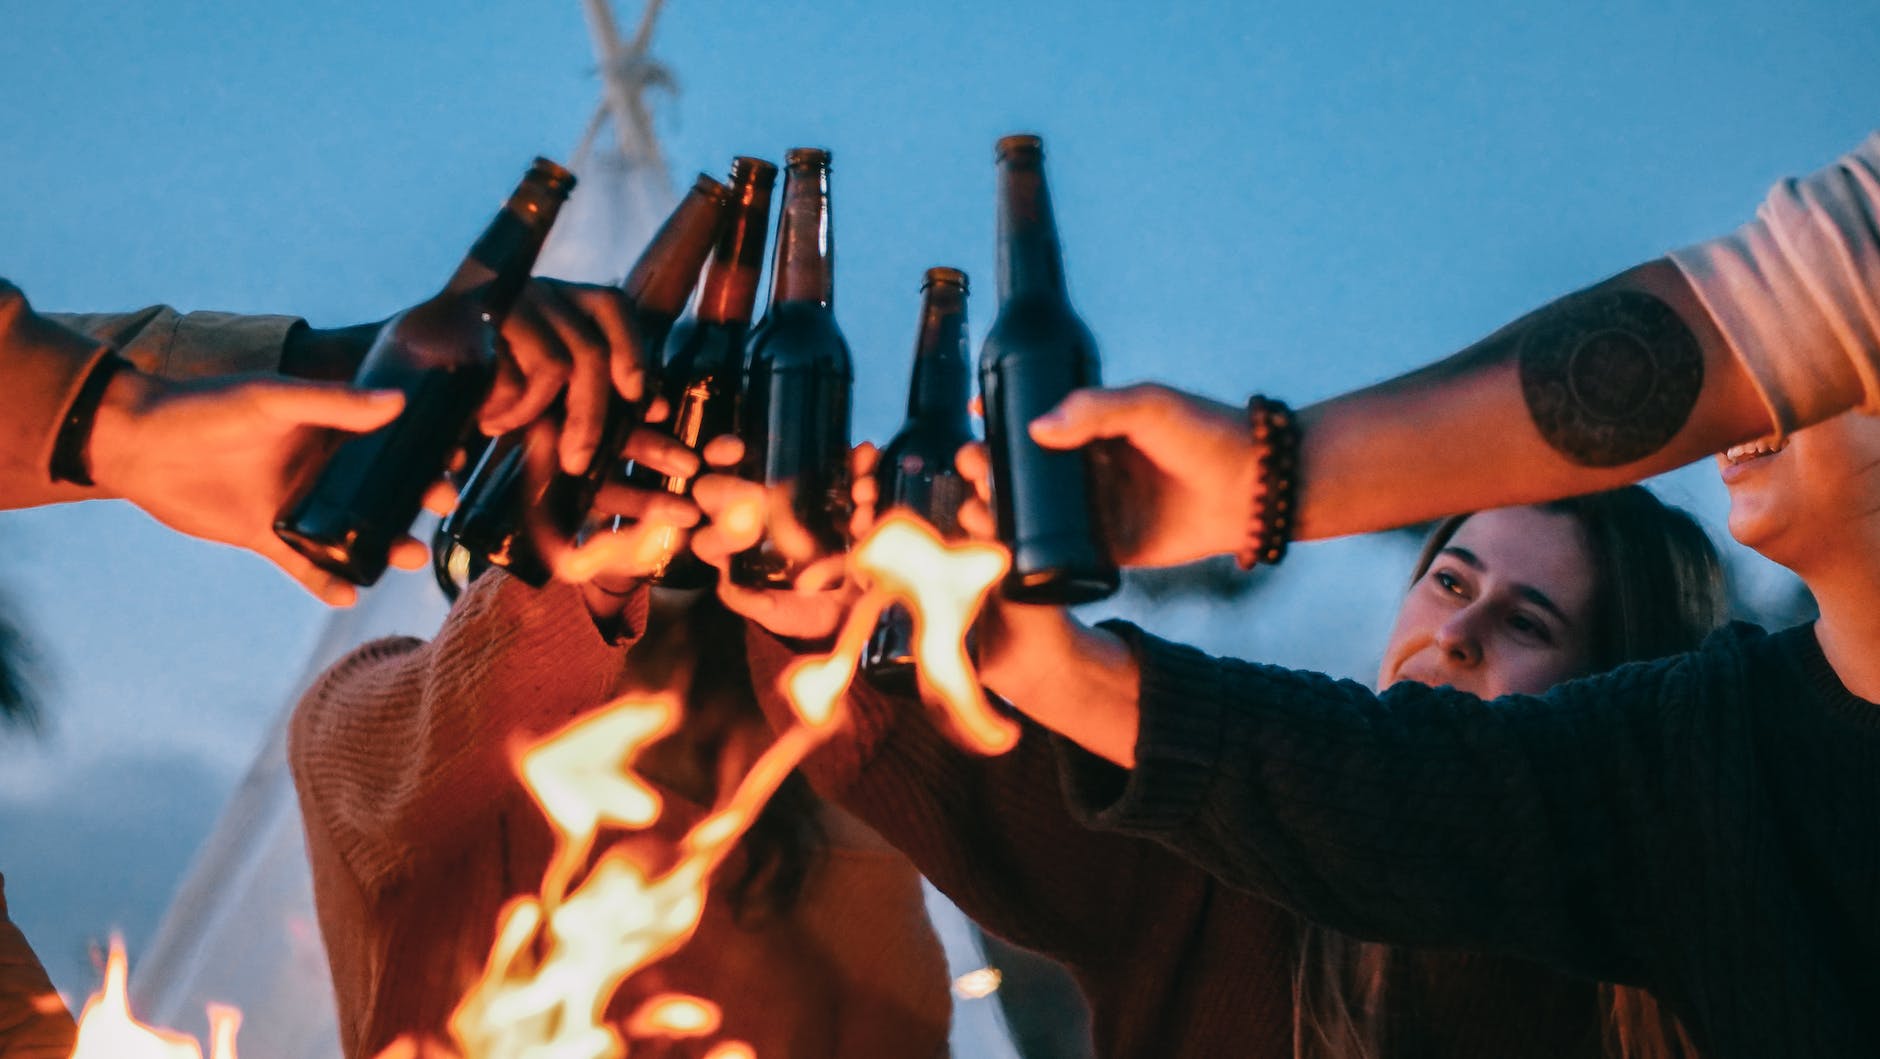 group of friends clinking beer bottles